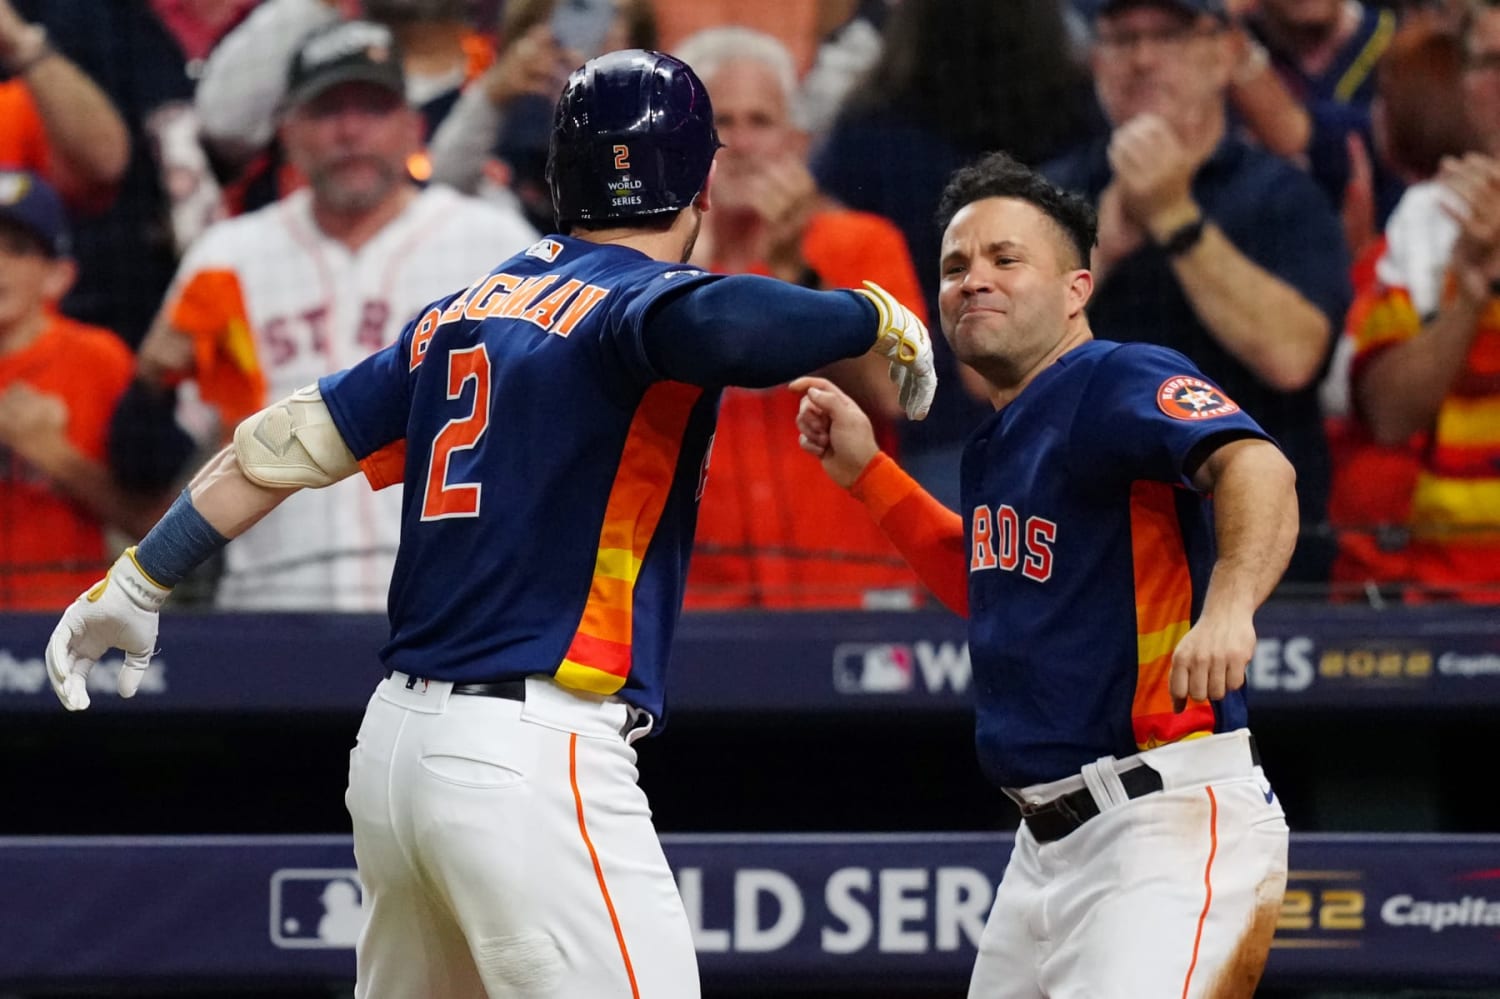 Altuve placed on injured list by Astros with left oblique discomfort